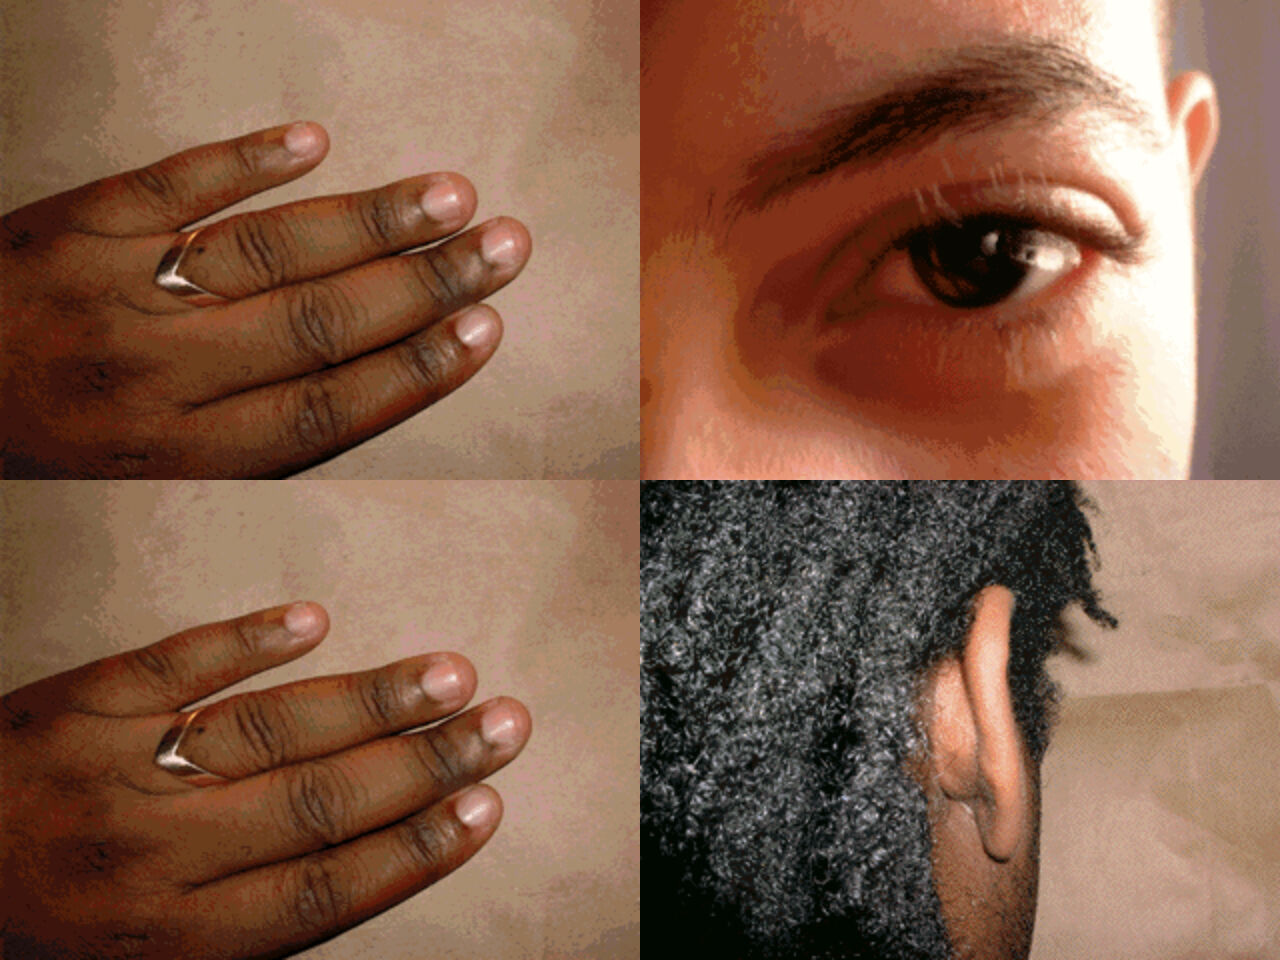 Screenshot of a webpage divided into quadrants, with the same image of a black hand with a ring in the top and bottom left, a close up of someone's eye with a lighter skin tone in the top right, and in the bottom right the back of a black person's head with just an ear and hair visible.